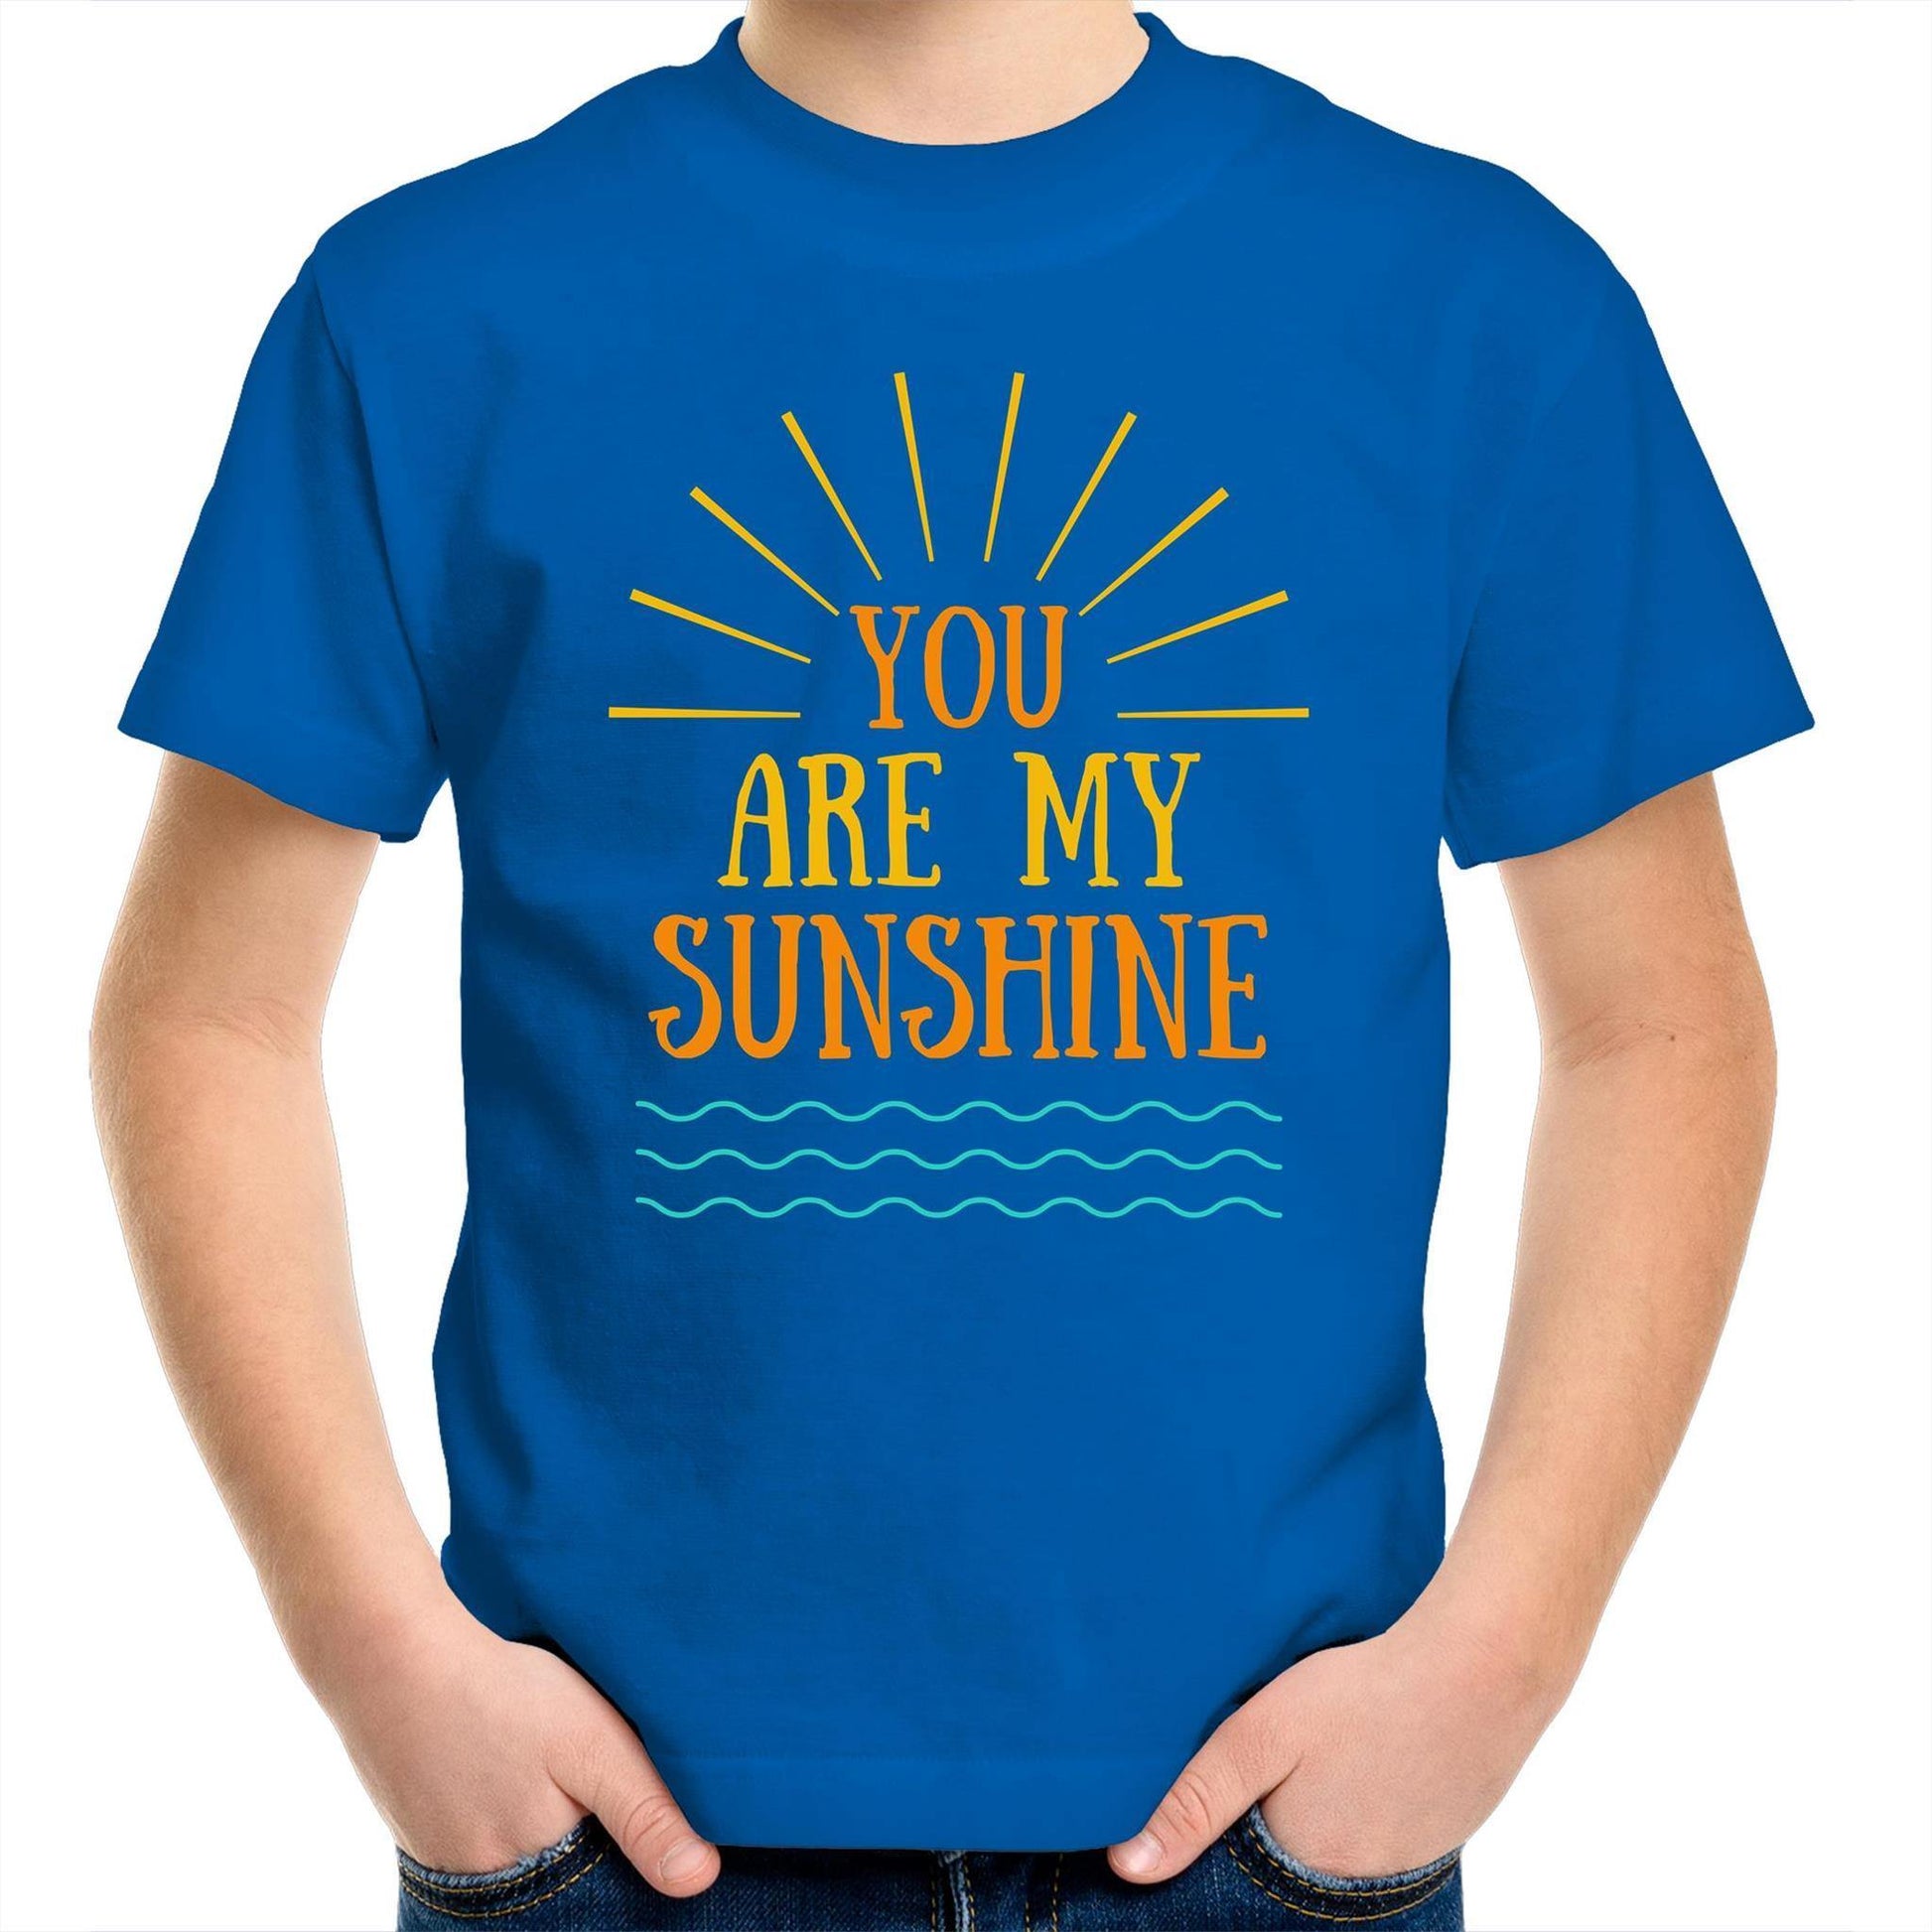 You Are My Sunshine - Kids Youth Crew T-Shirt Bright Royal Kids Youth T-shirt Summer